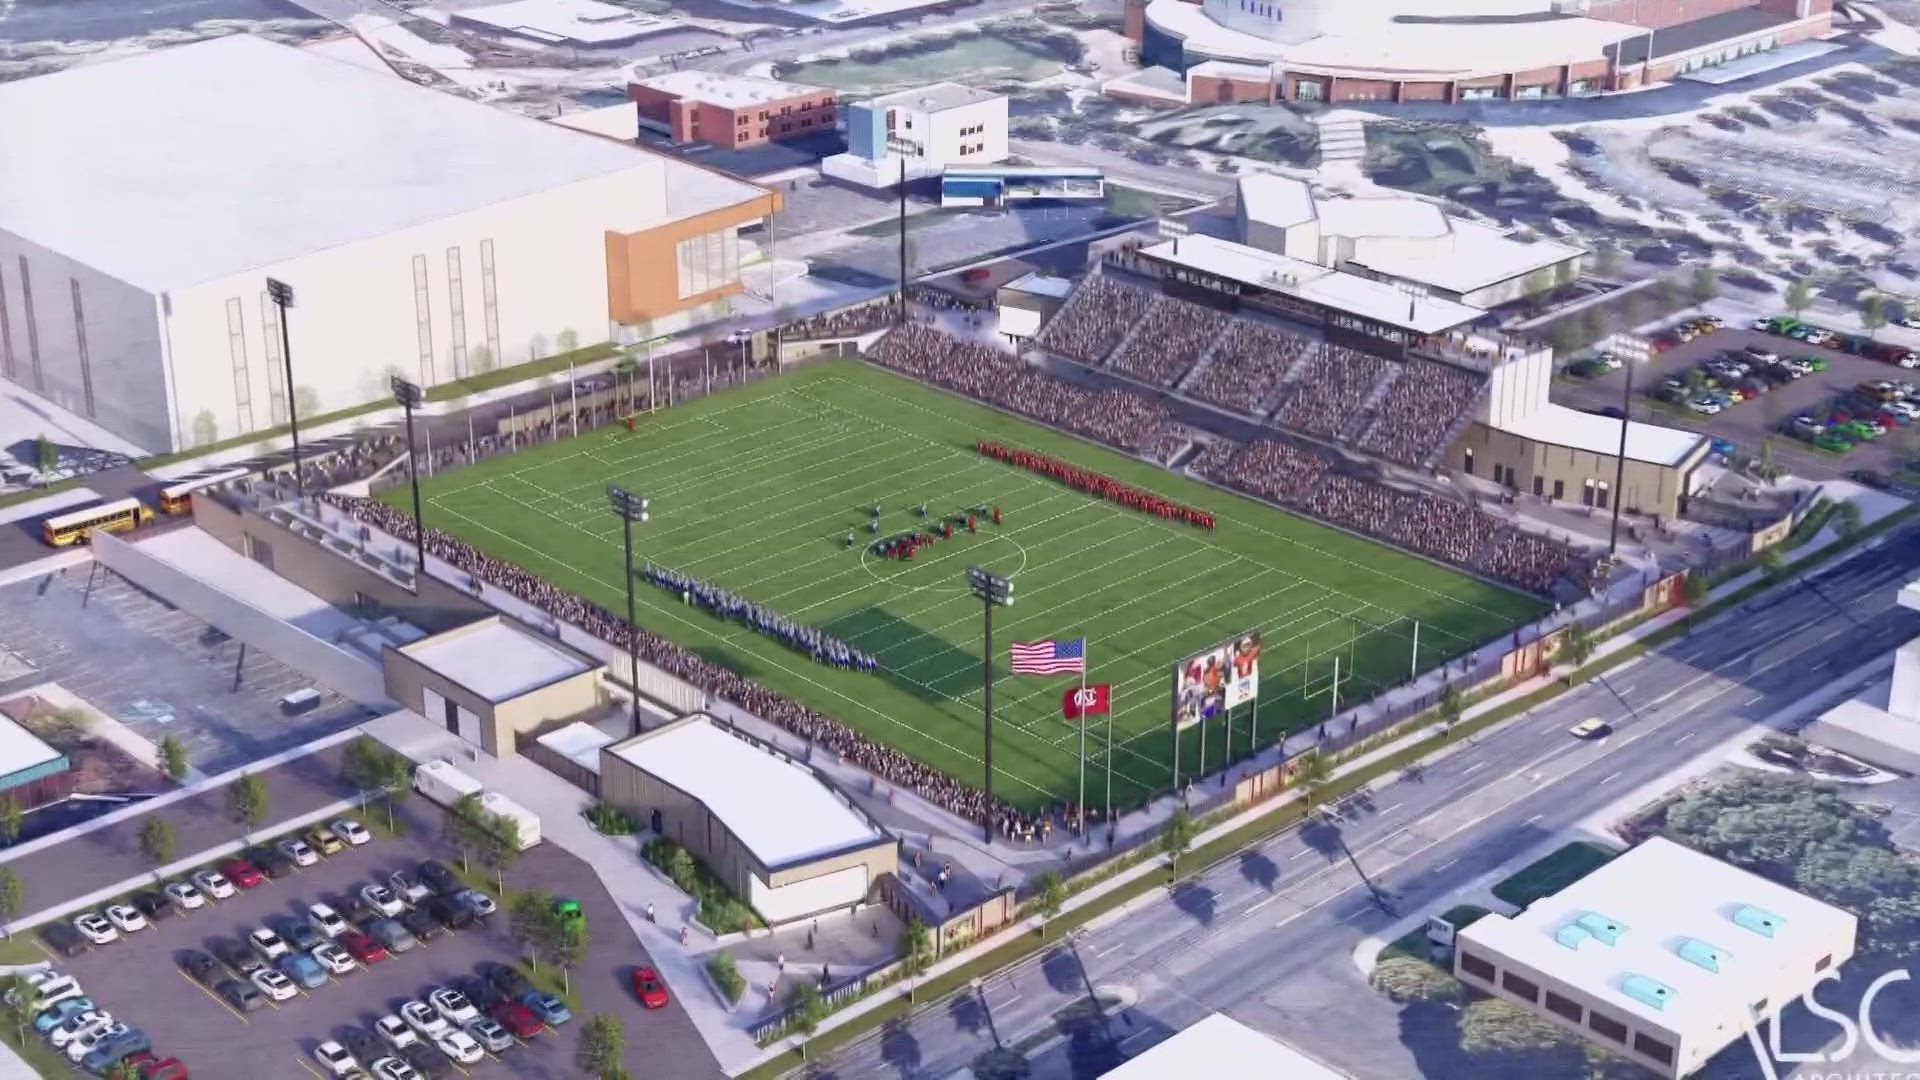 The proposed names include “The North Bank Stadium Presented by the Kalispel Tribe of Indians," with the field named “Northern Quest Field” or “Kalispel Field.”